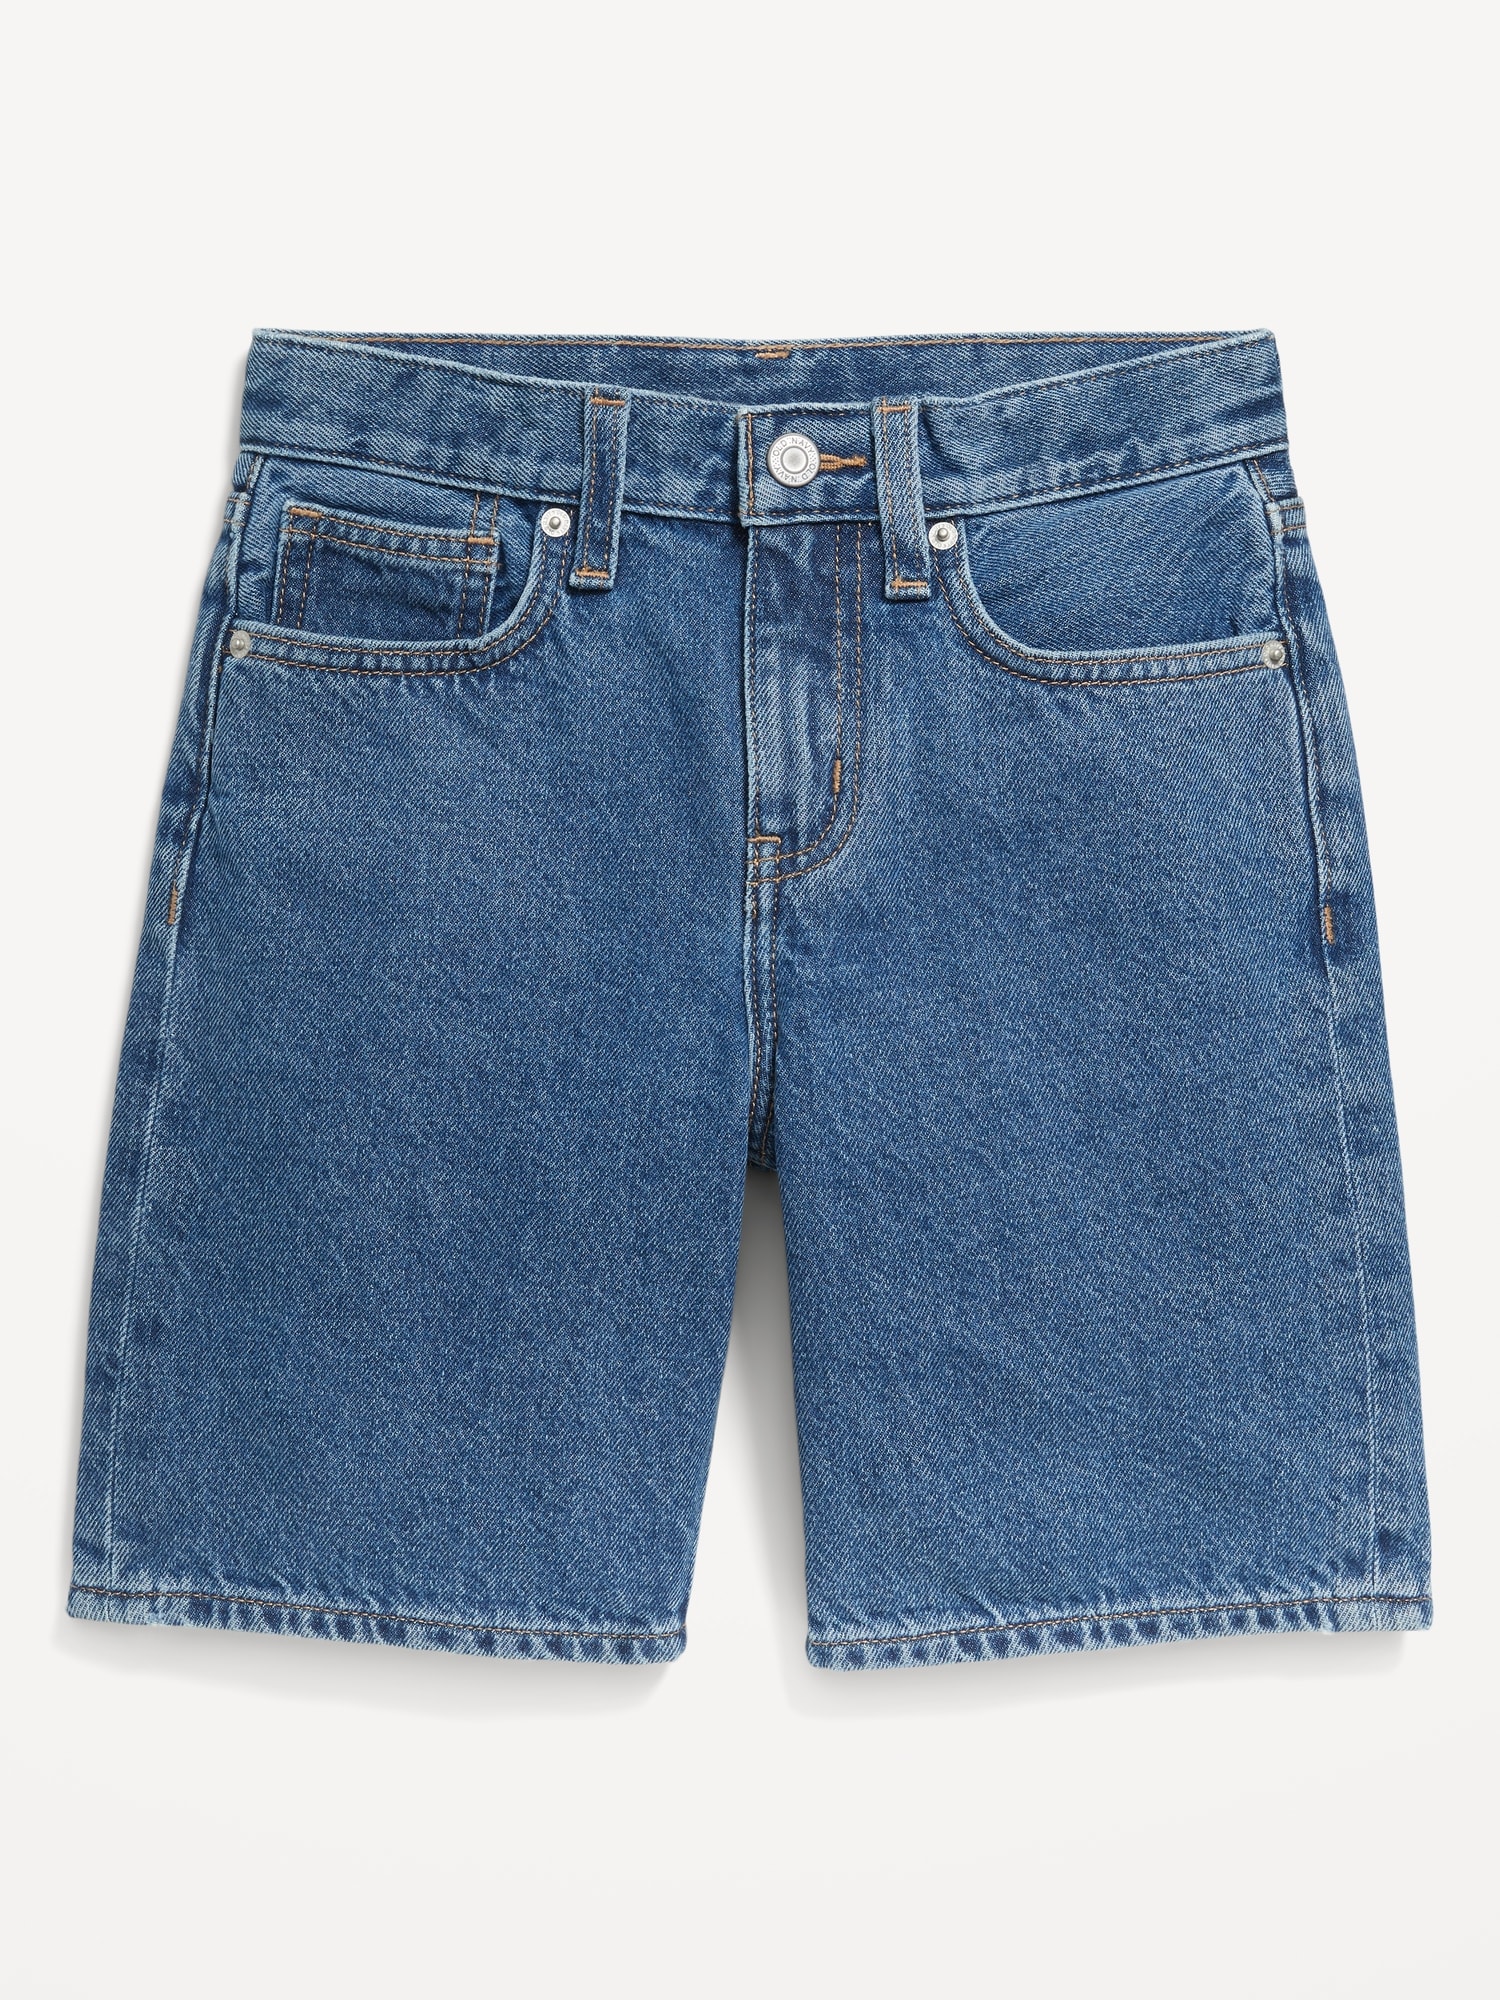 Baggy Non-Stretch Jean Shorts for Boys (At Knee)